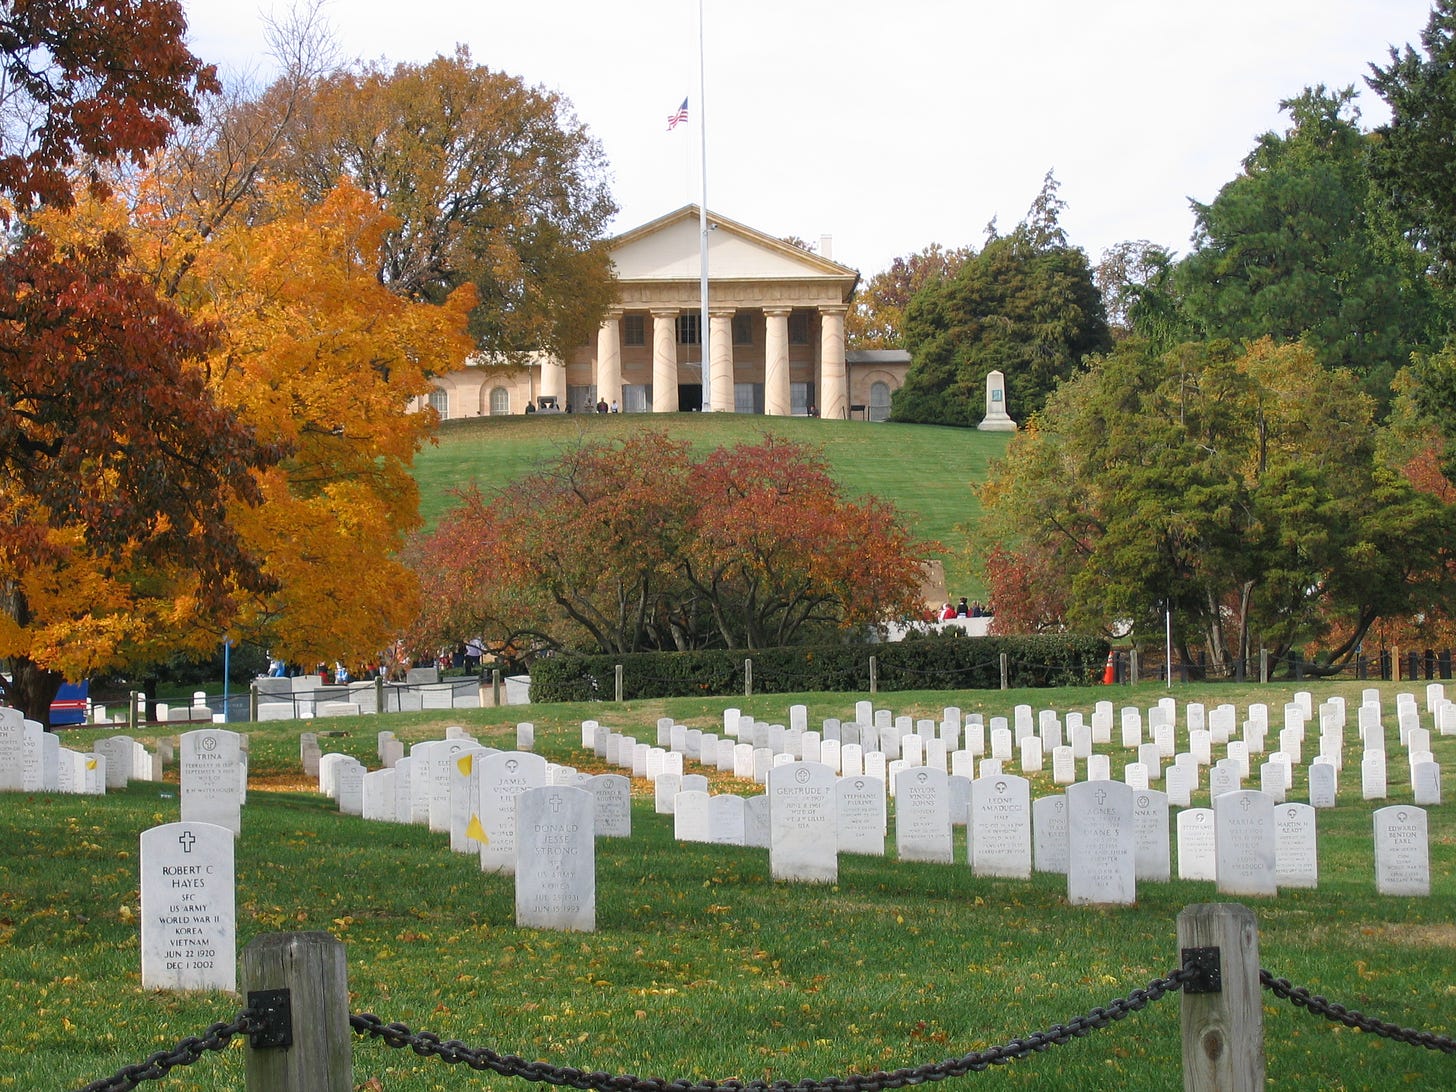 Photo shows Arlington House in the background.  White tombstones can be seen in rows in the foreground.